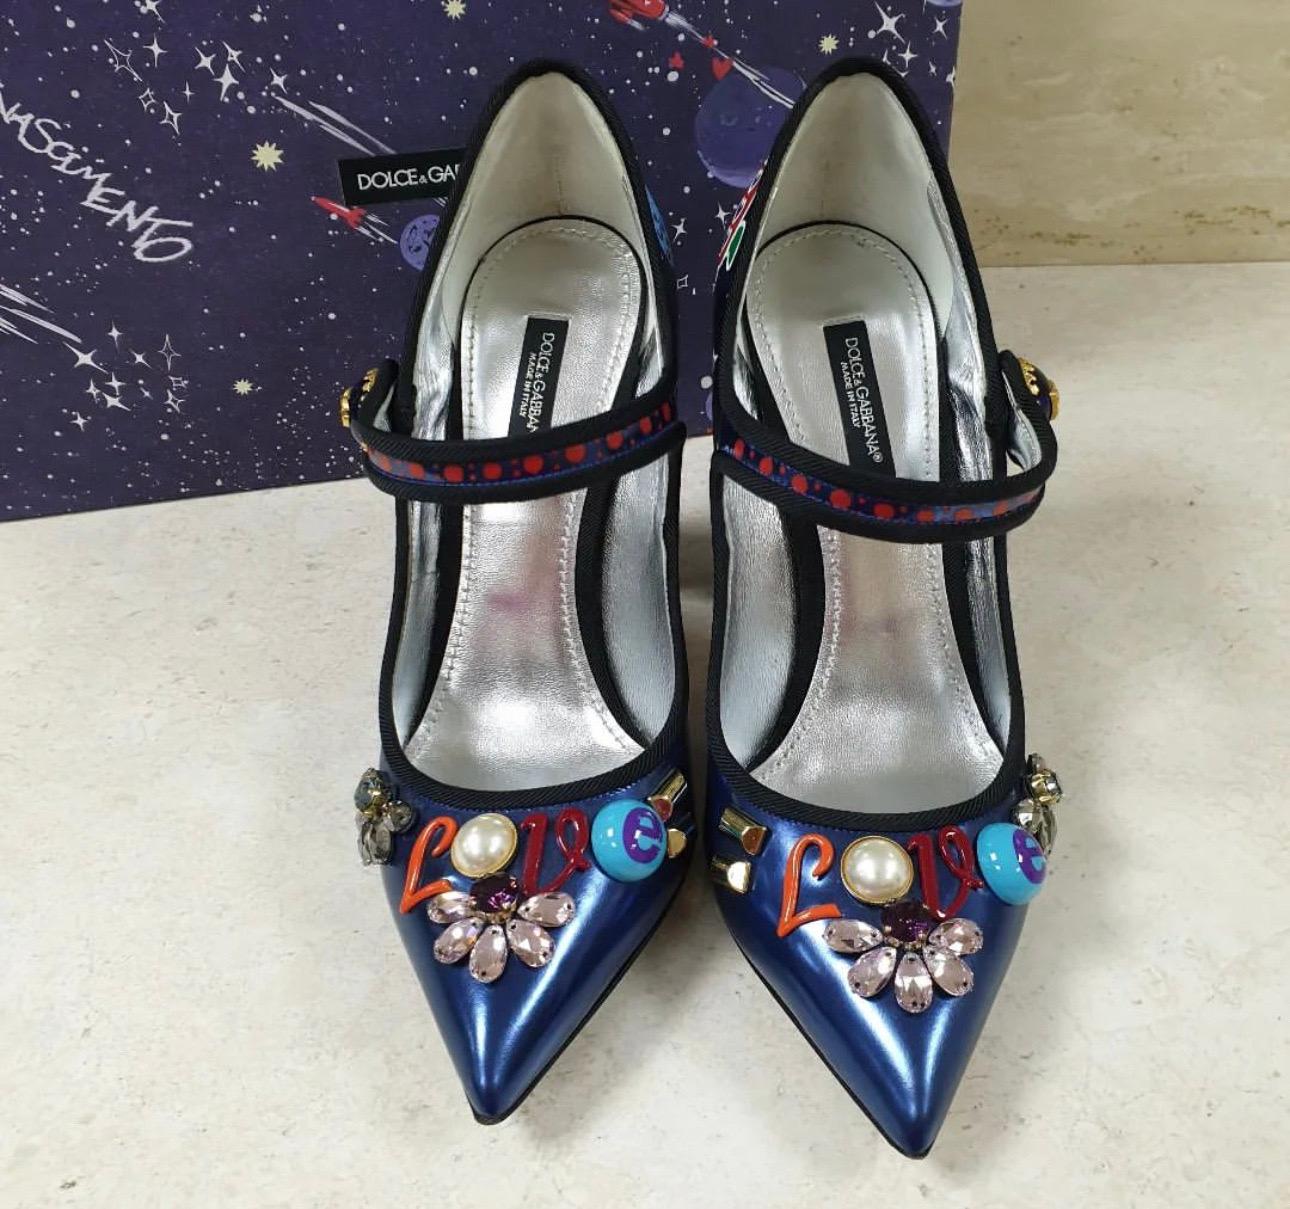 Leather Mary Jane pumps featuring coloured appliques, jacquard covered heel and leather sole.
75% Calf Leather, 15% Rayon, 10% Polyester
Sole: 100% Leather

Color: Blue
Gender: Women
Size & Fit
Size type: IT

Heel: 41.34 inches
Heel: 10,5 cm

Very